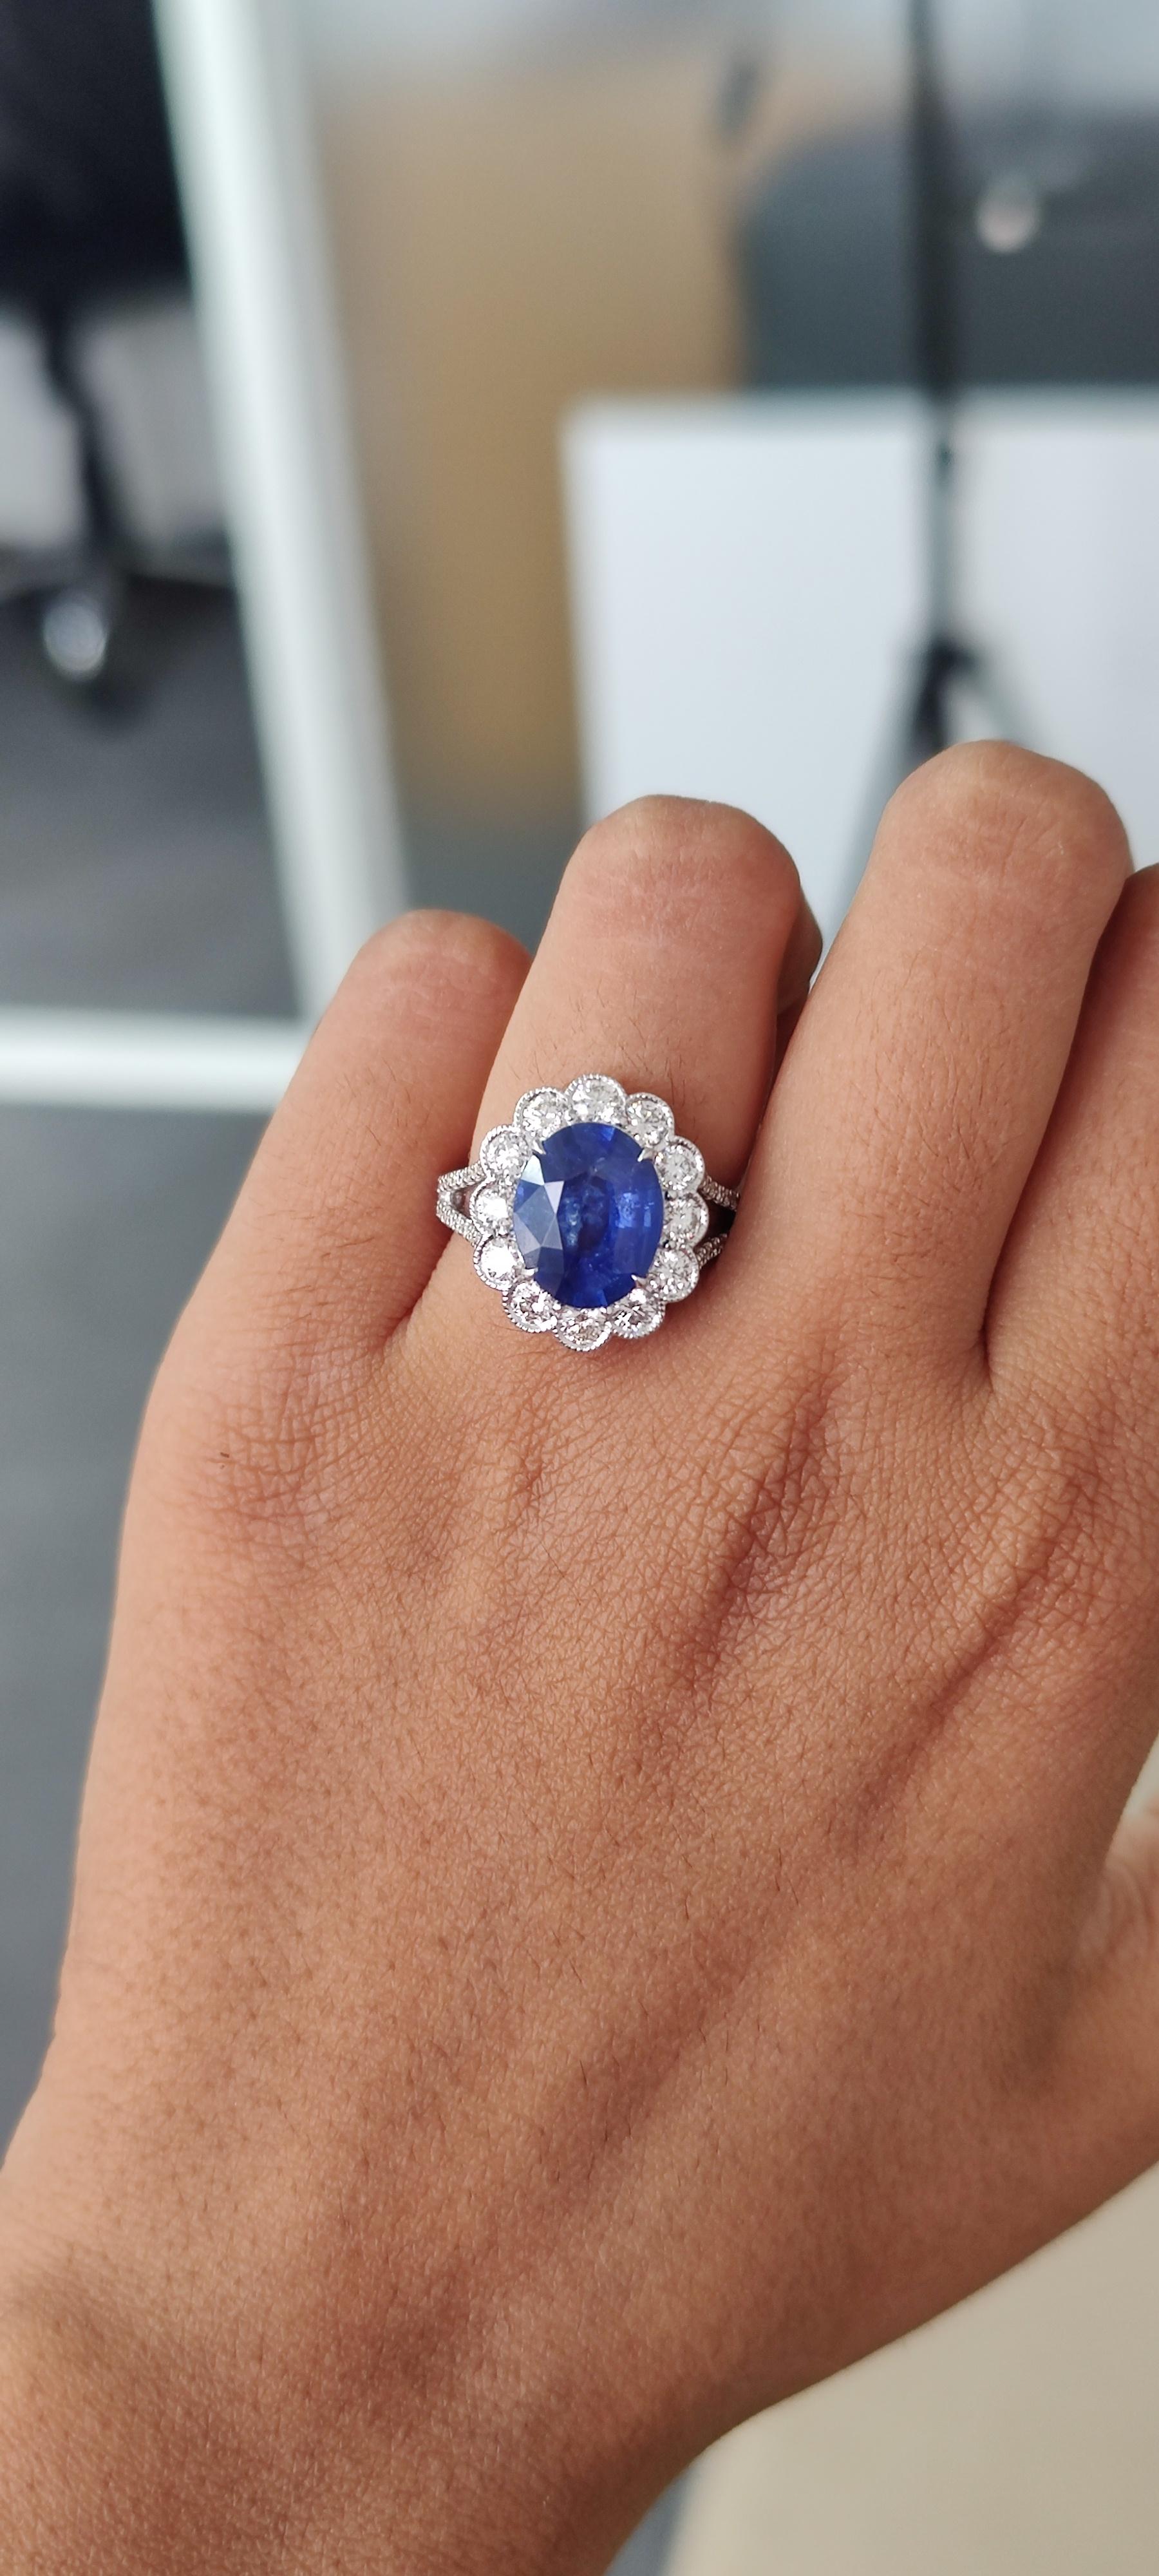 Oval Cut 4.32 Carat Ceylon Royal Blue Sapphire Ring in 18K White Gold For Sale